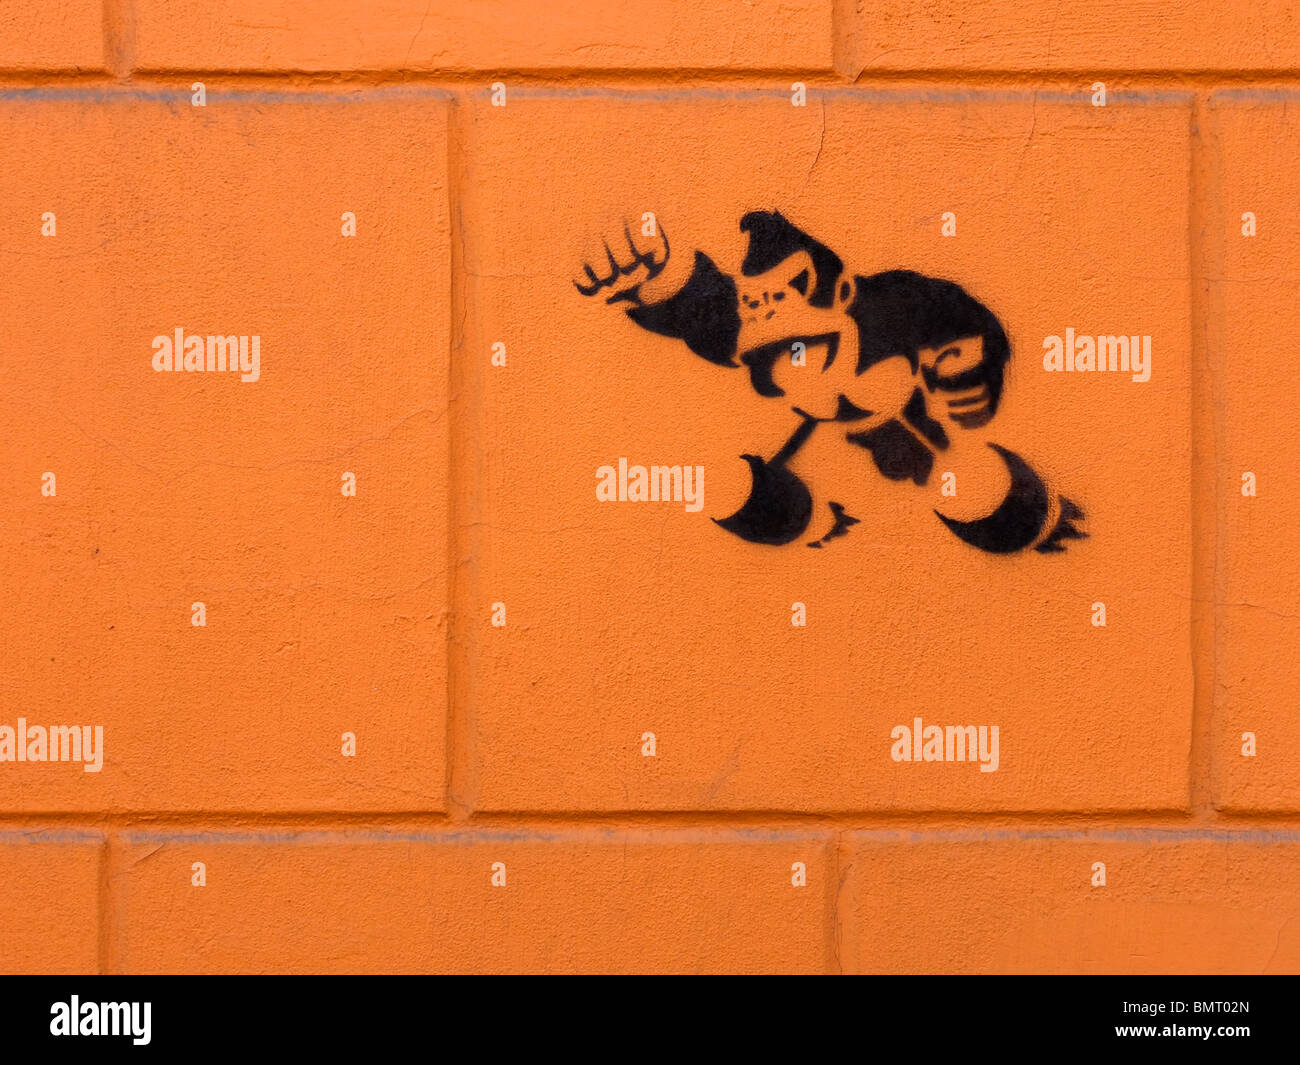 Funny stencil drawing on the orange wall in Izhevsk, Udmurt Republic, Russia Stock Photo